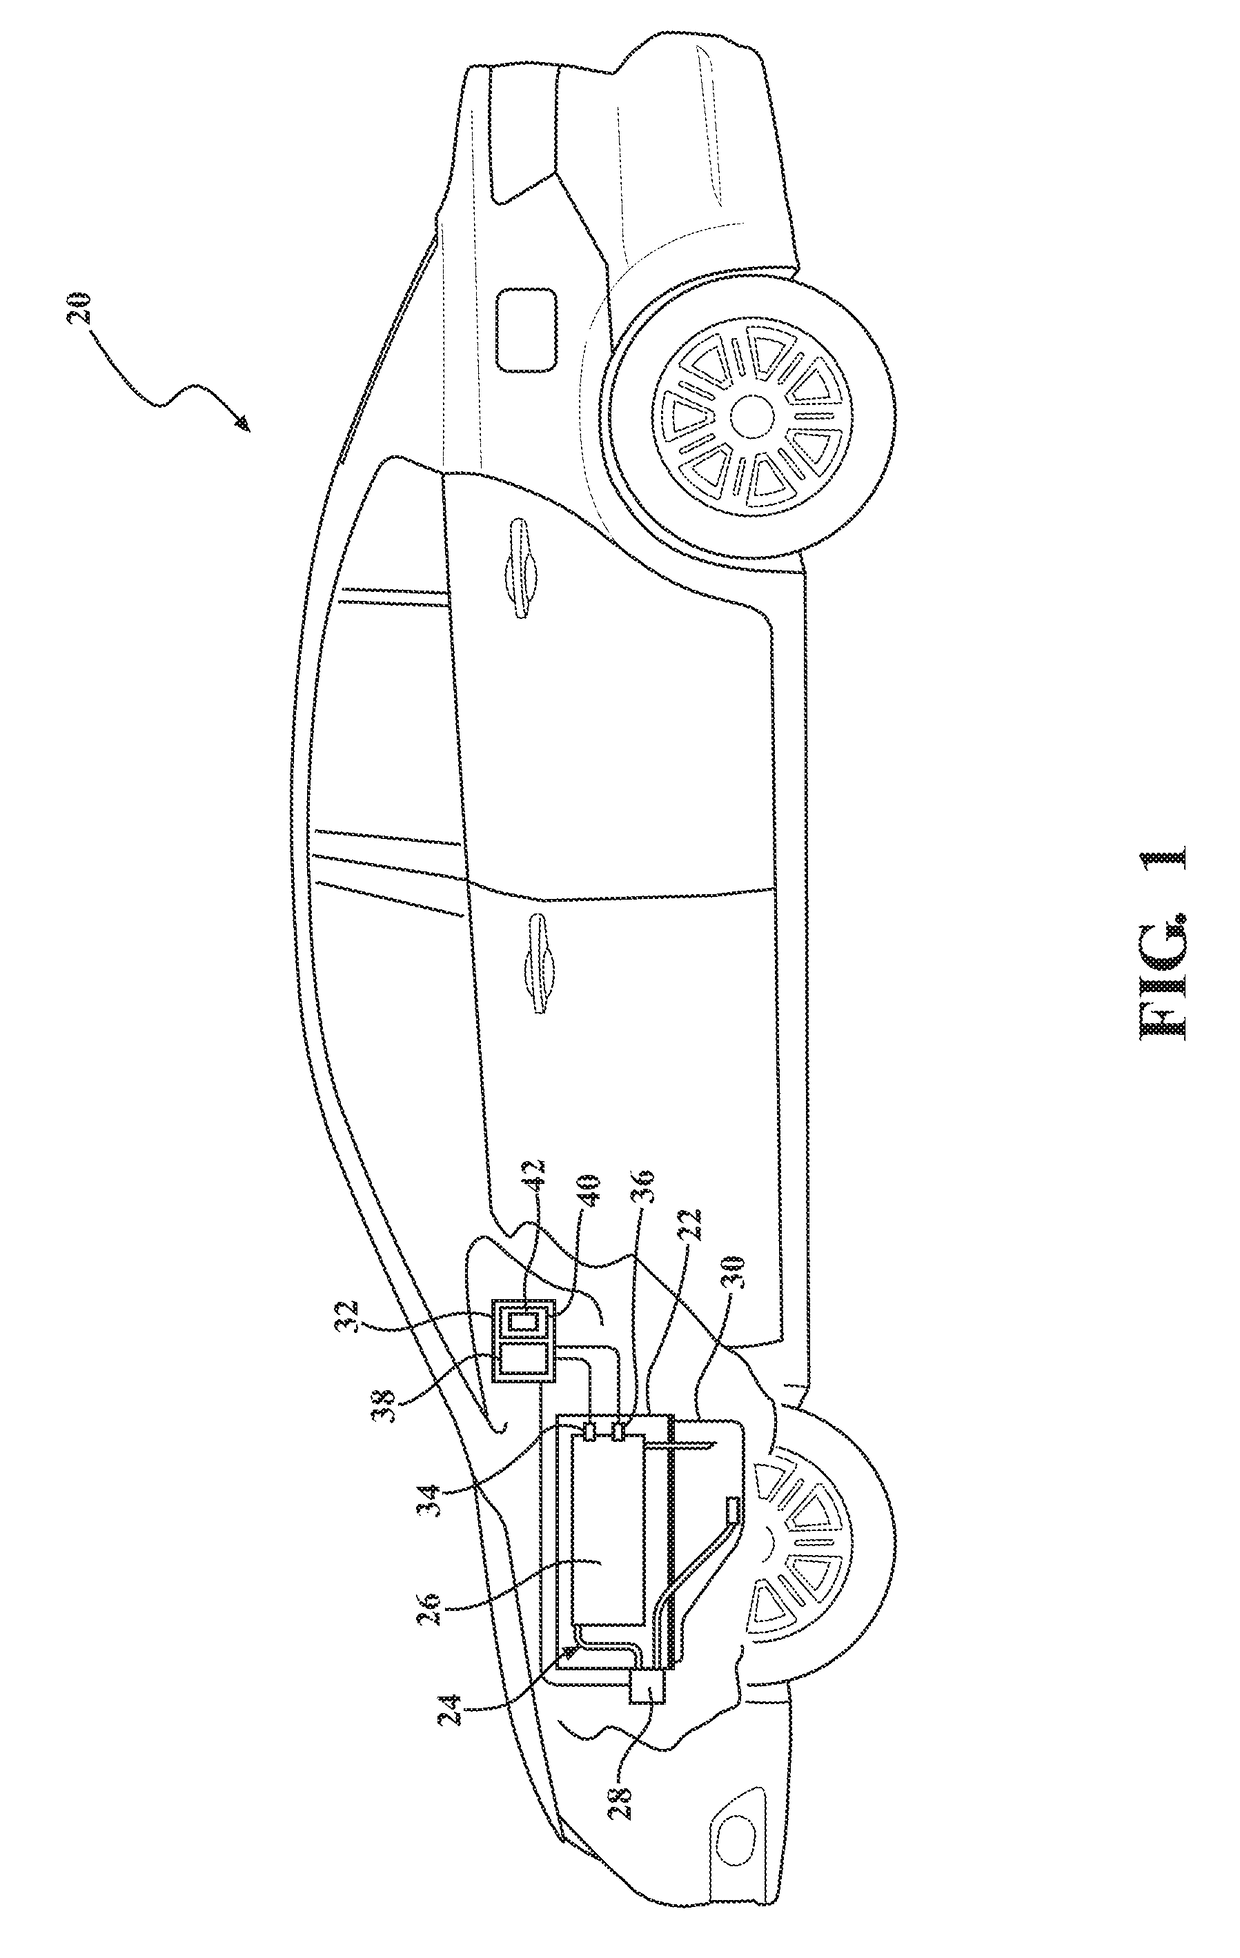 Method of diagnosing a lubrication system of an engine